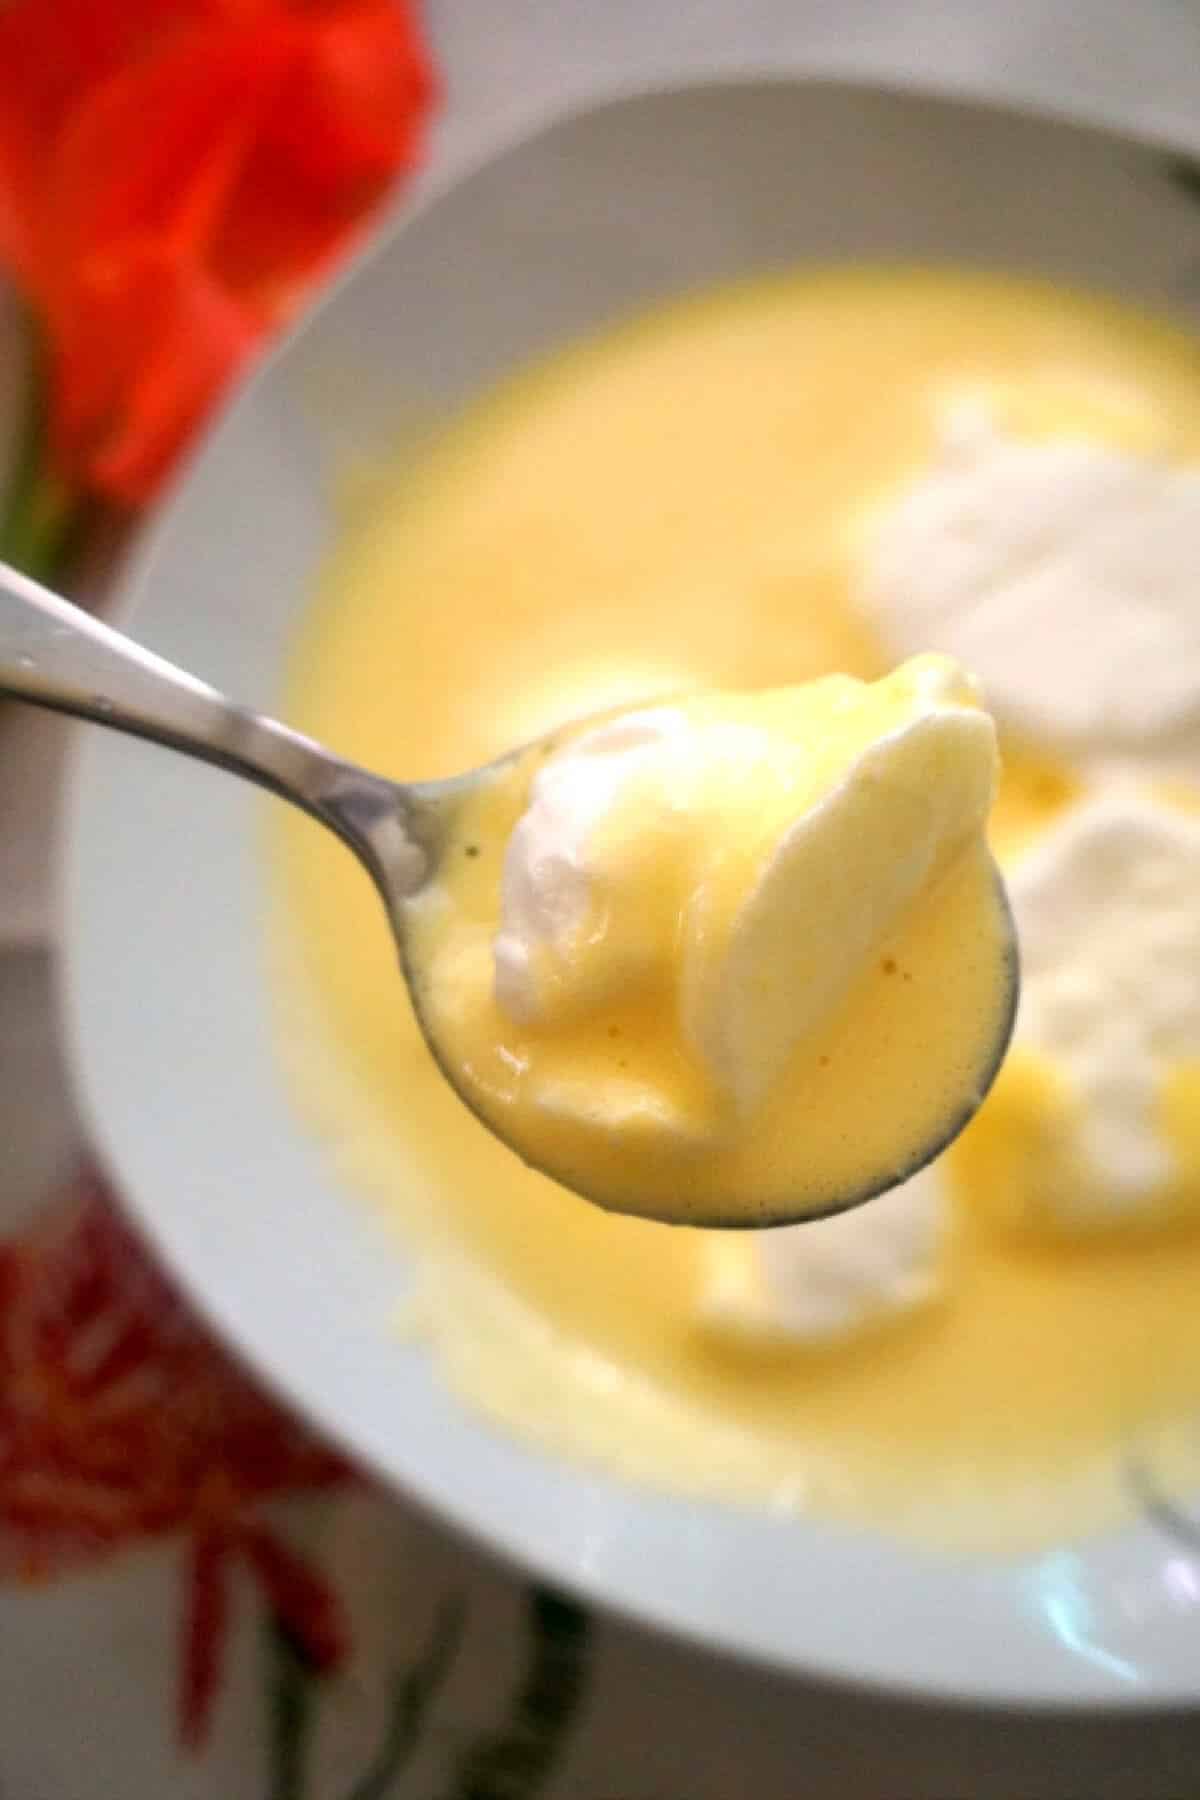 A spoonful of custard with egg white balls.